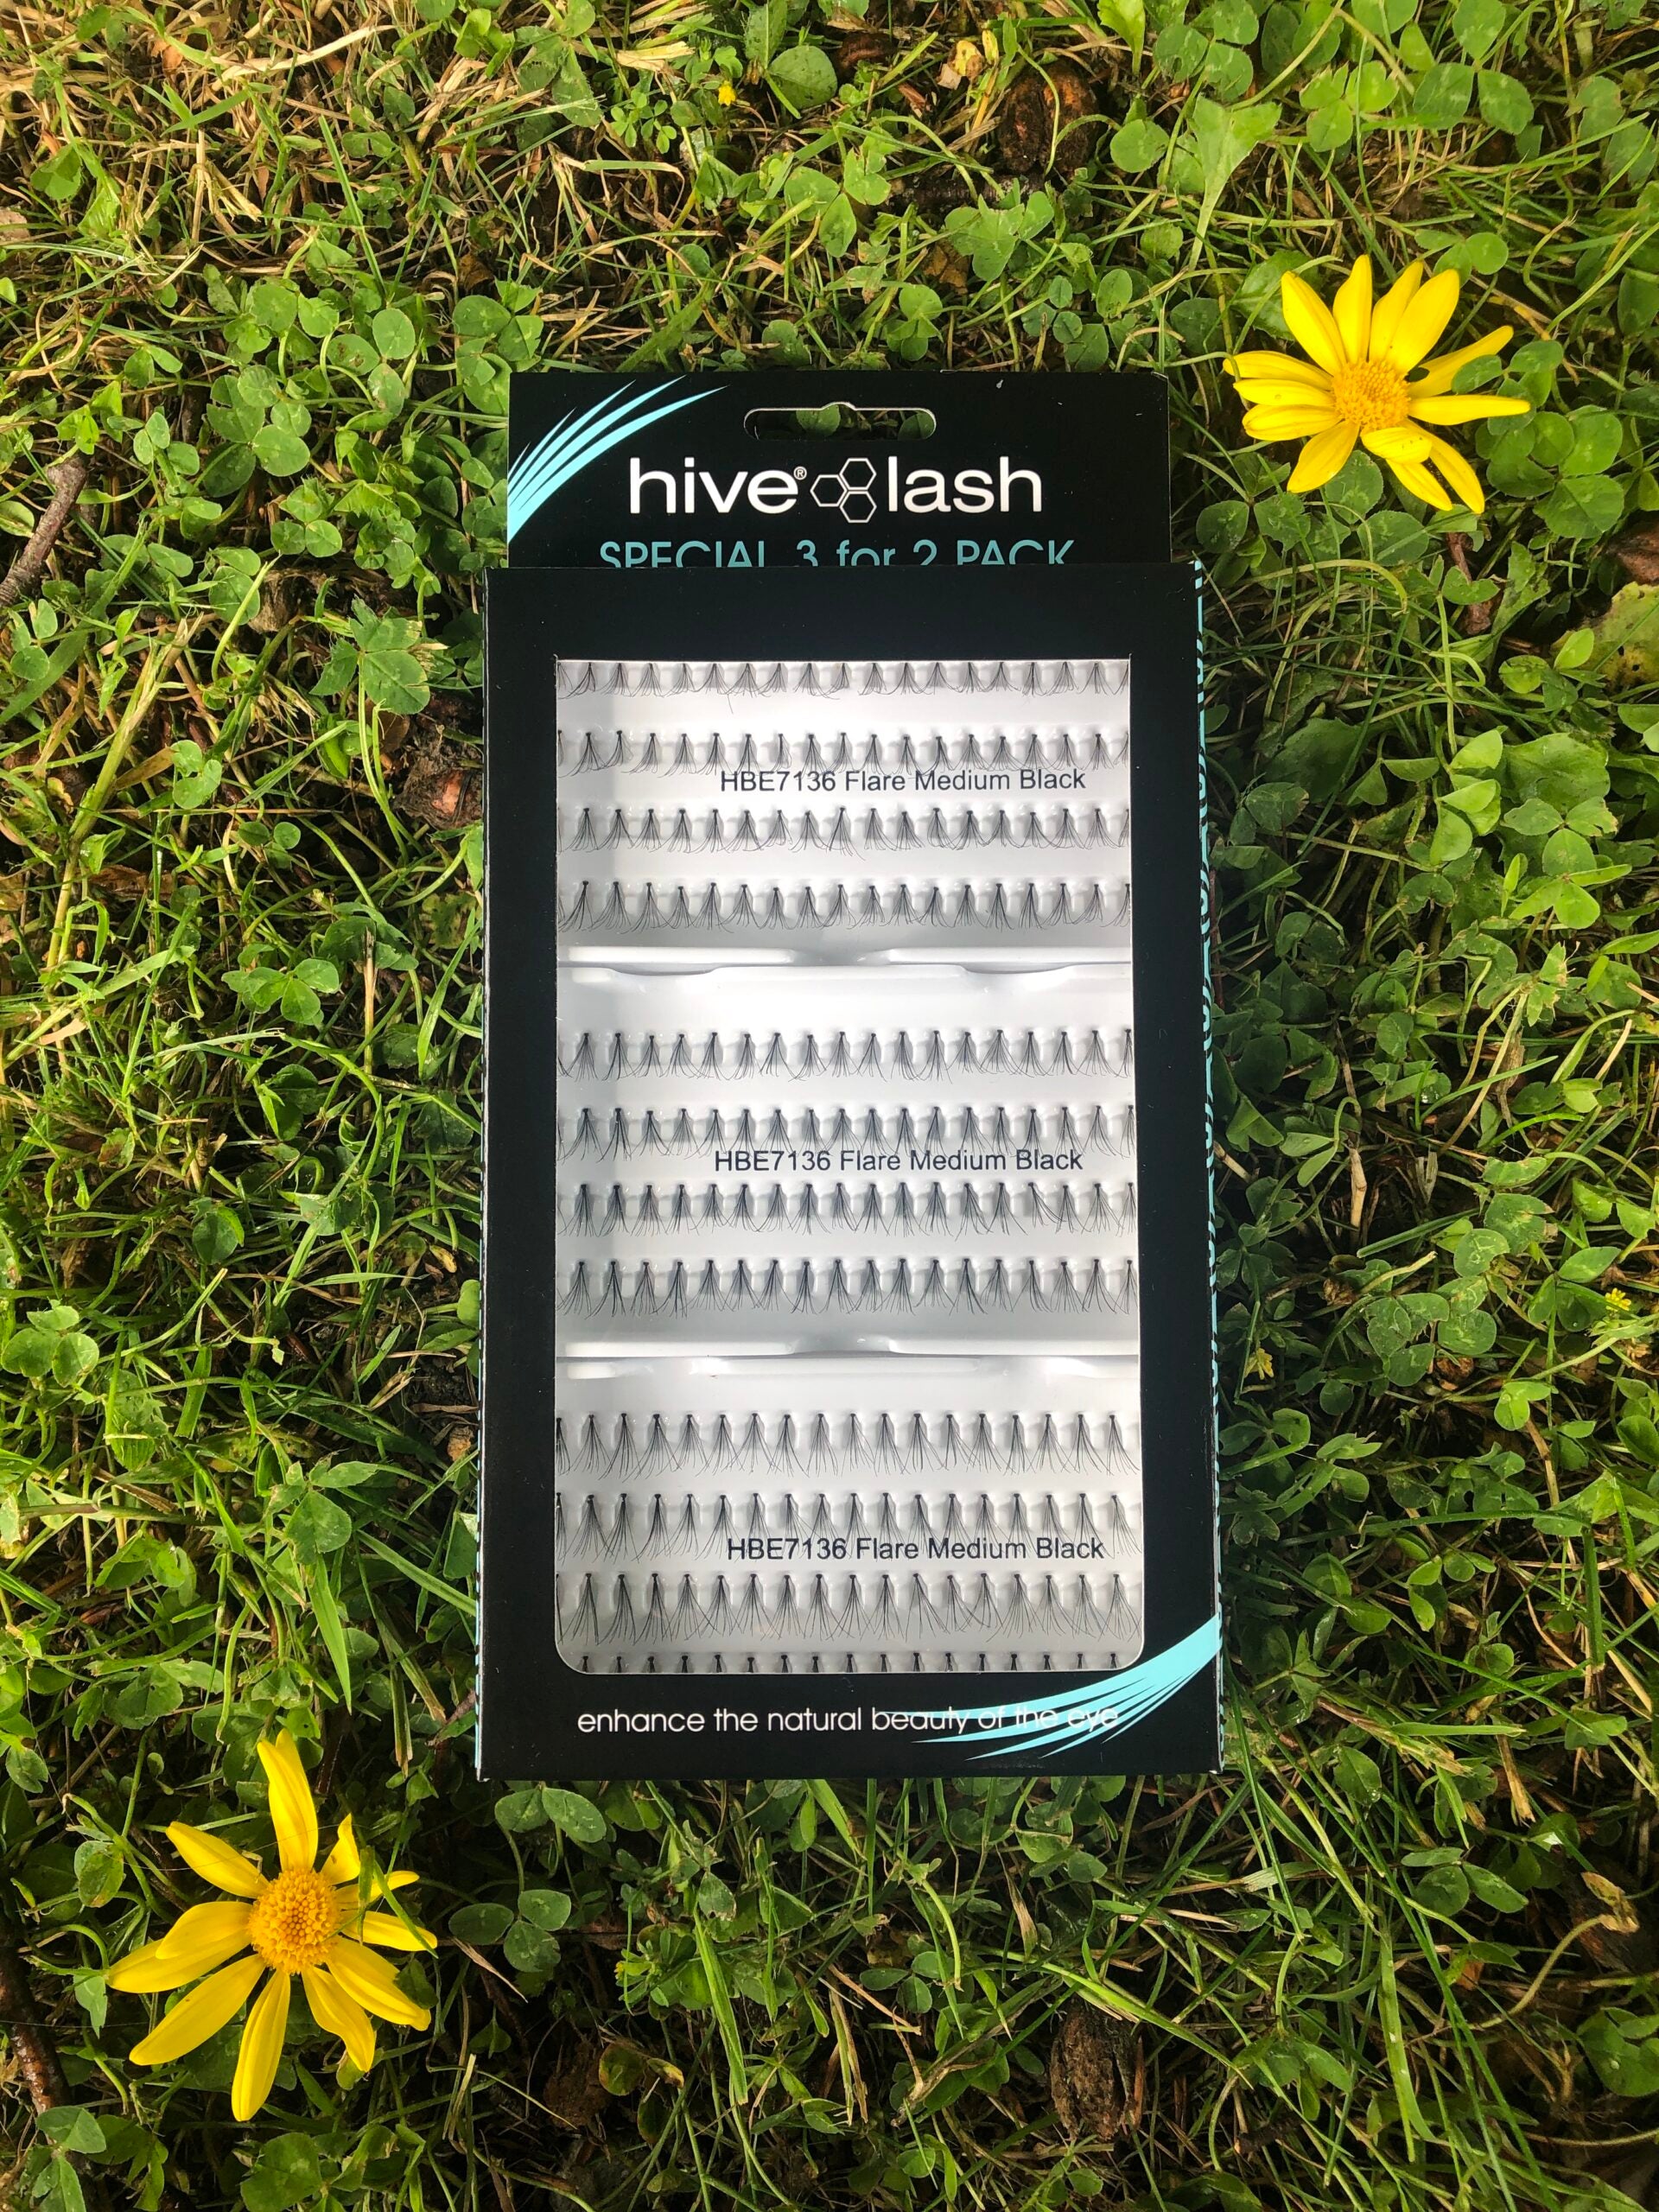 Hive Individual Lashes - Small Black Flare (3 for 2 pack)